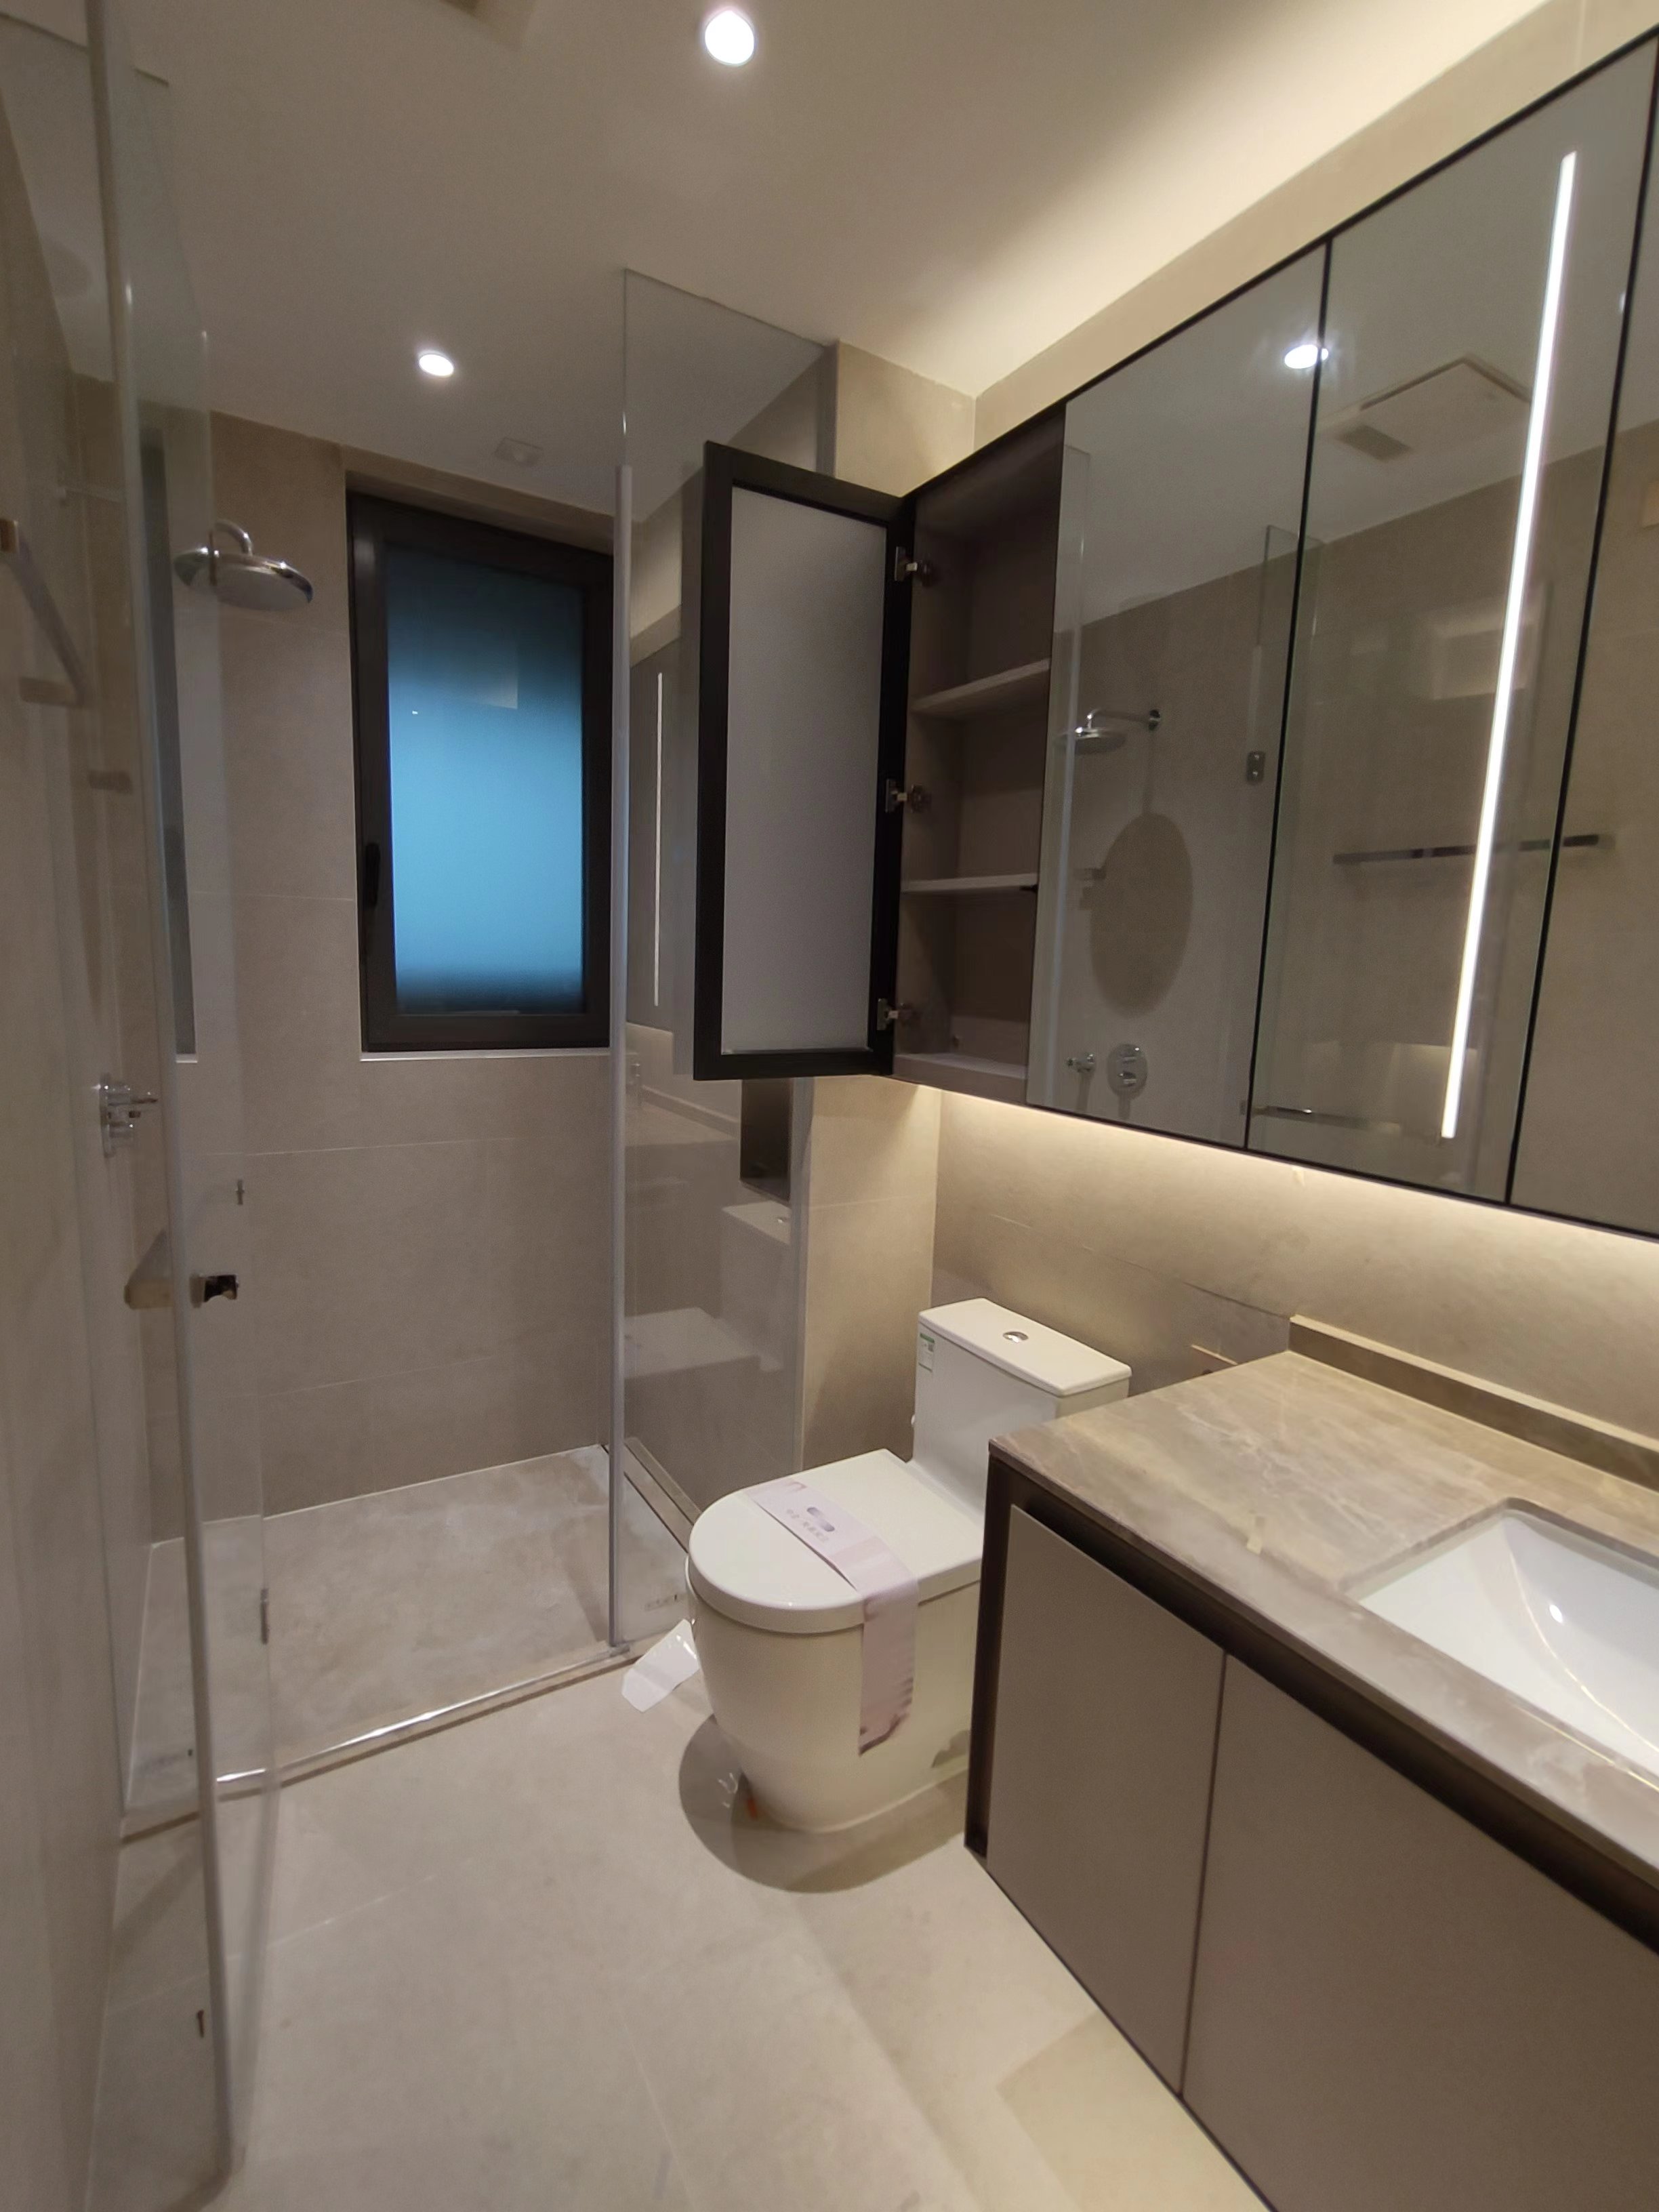 guest bathroom Brand-new High-end 3BR Riverside Apartment for Rent near Shanghai’s Lujiazui